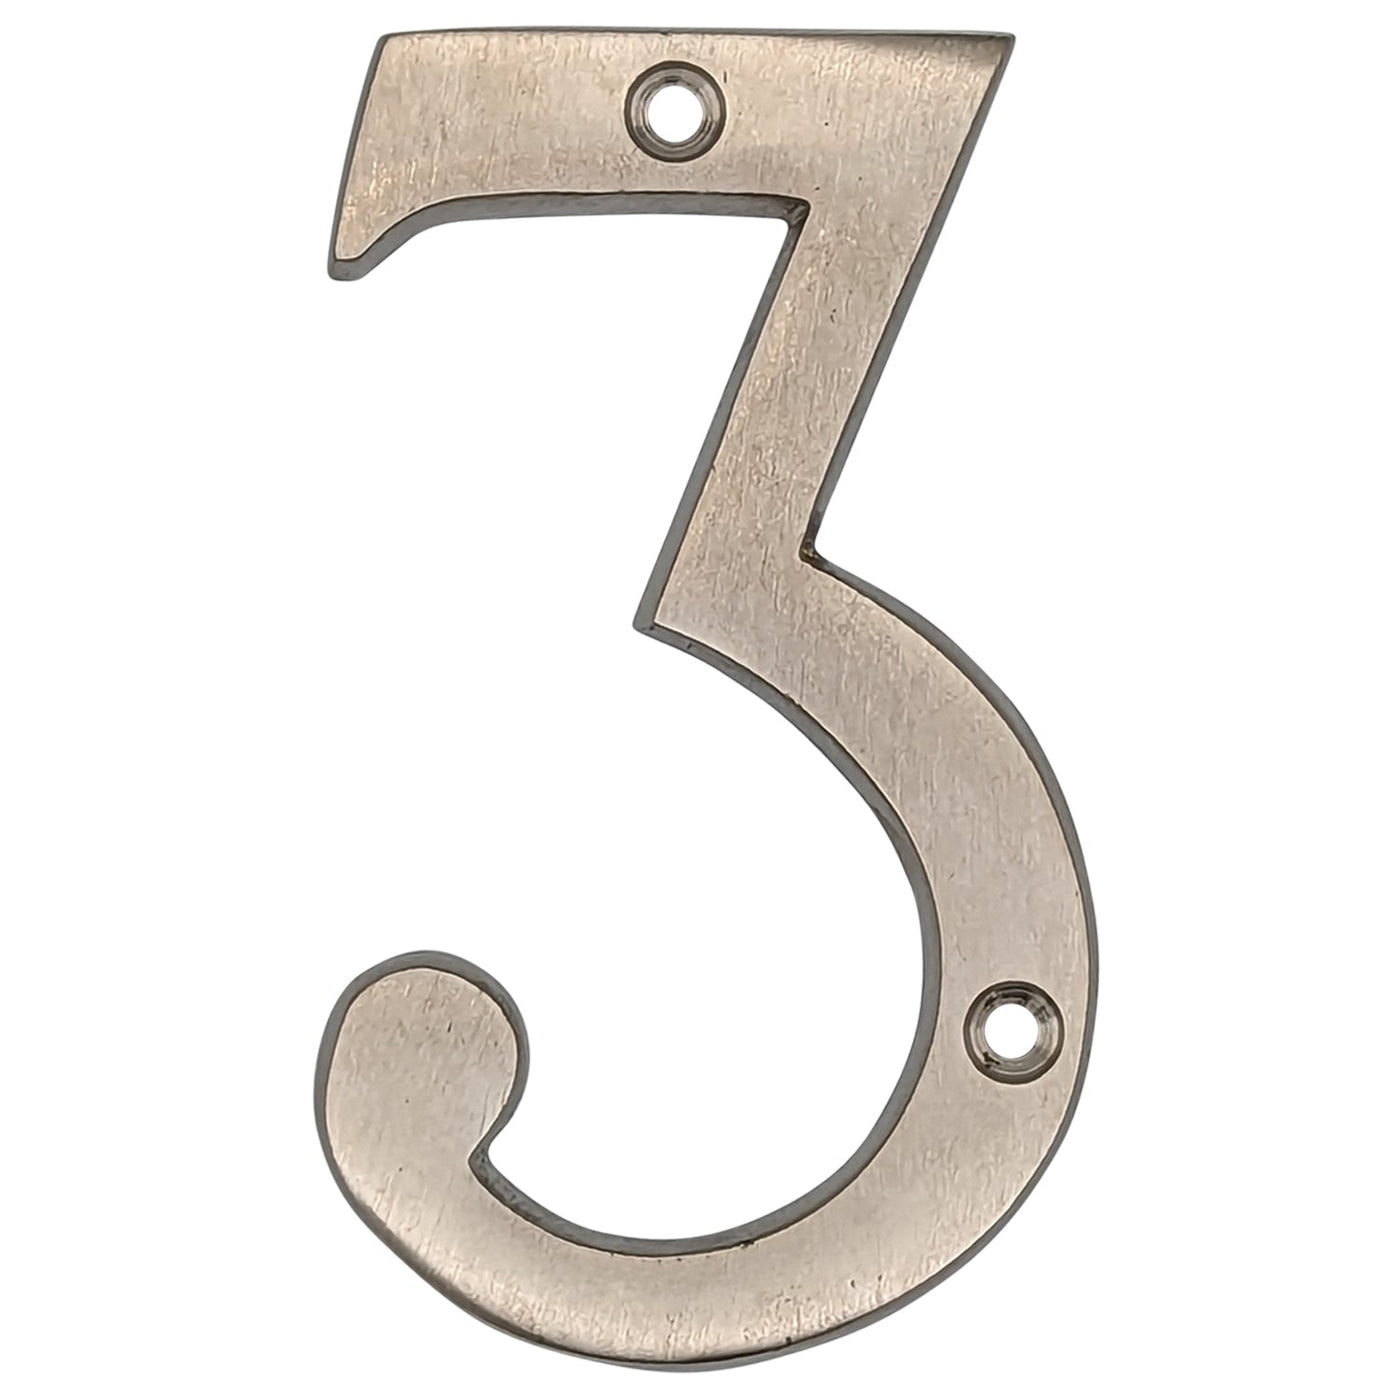 4 Inch Tall House Number 3